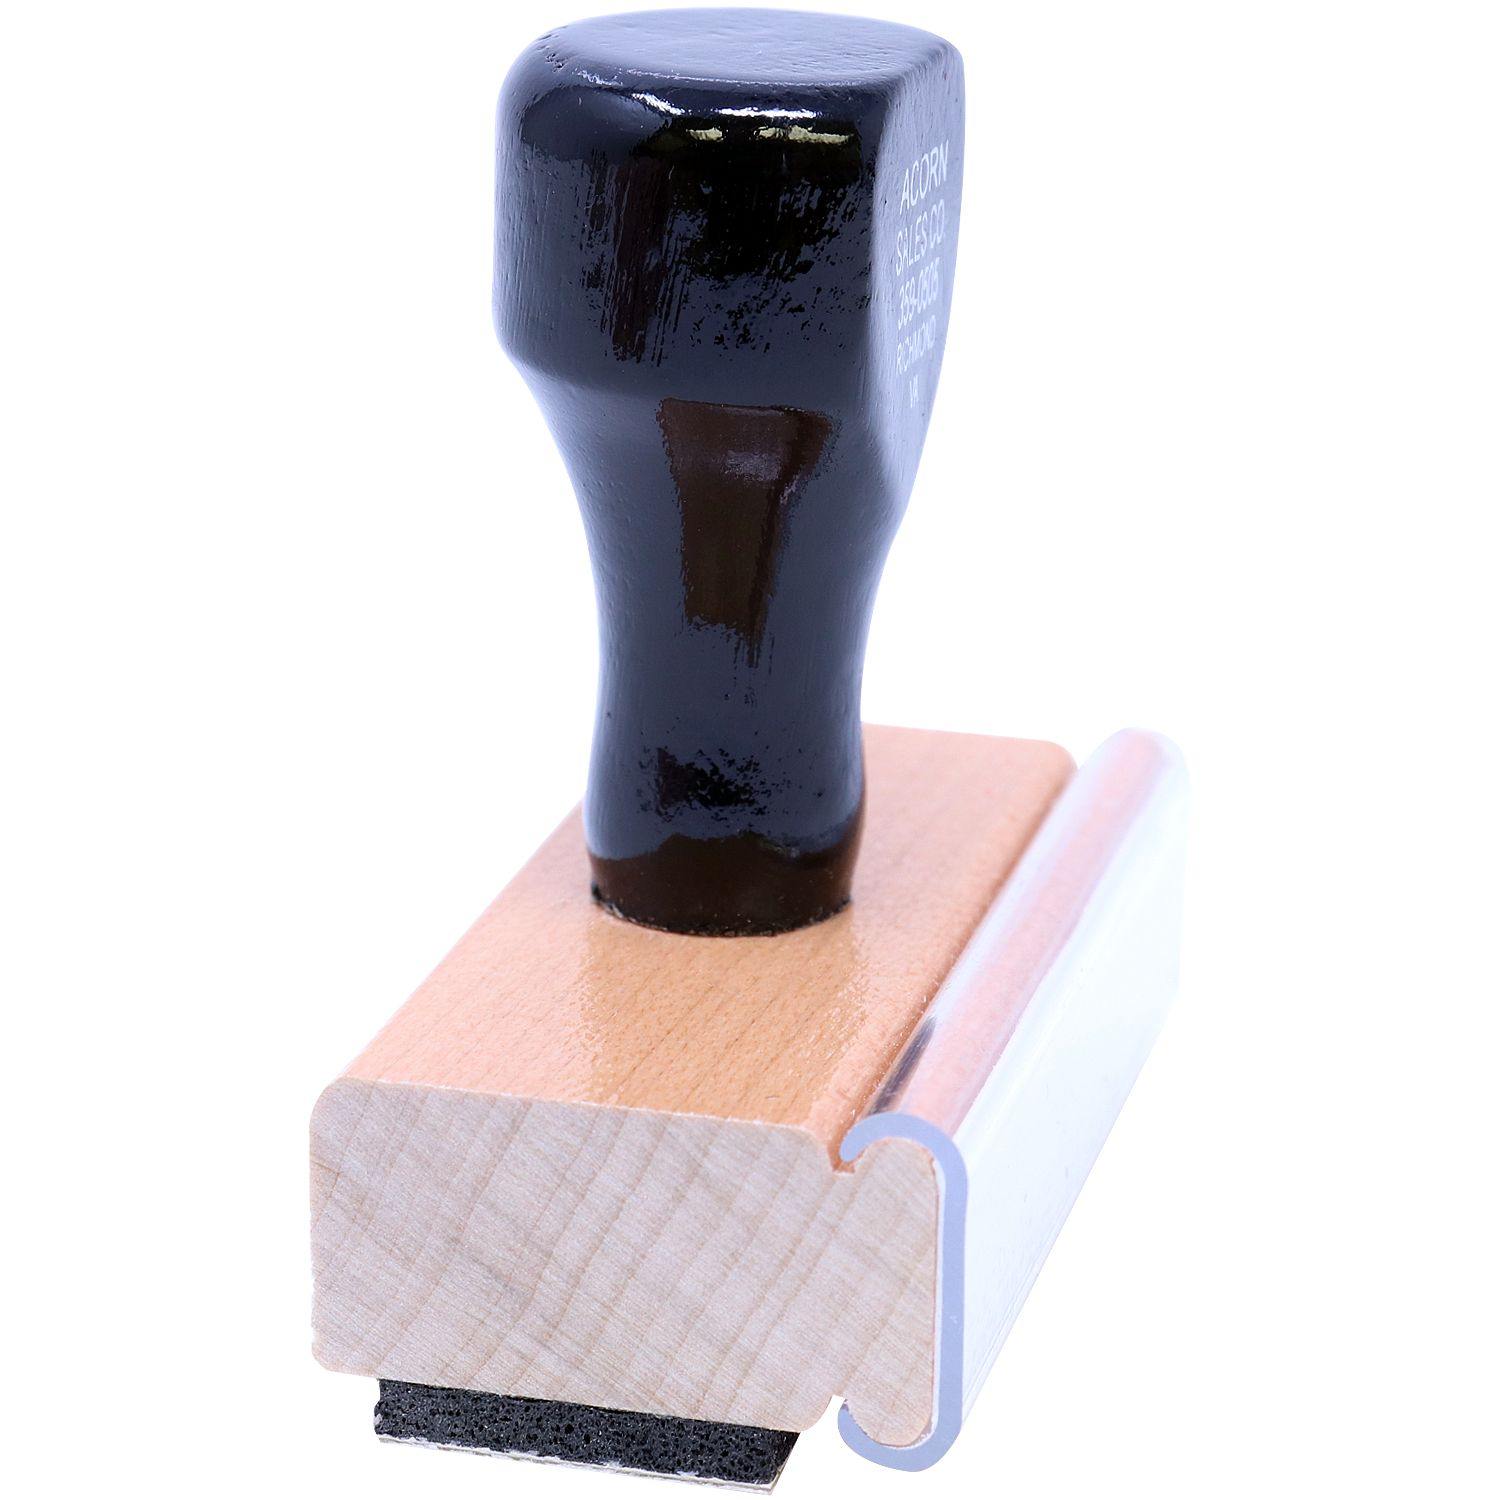 Side View of Draft Rubber Stamp at an Angle